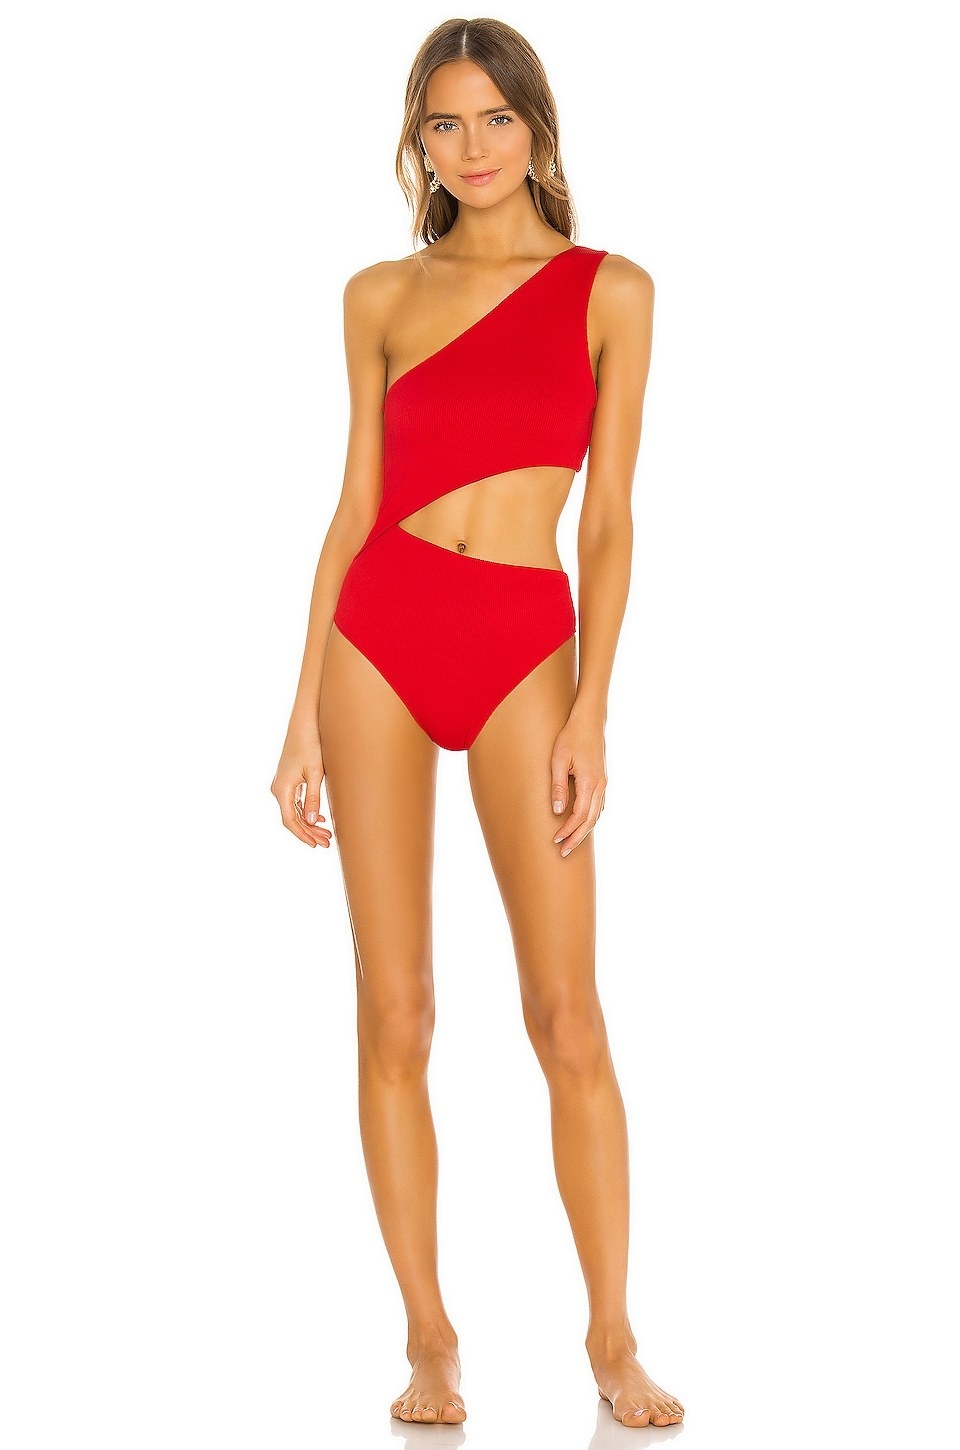 Model wearing red bodysuit with cut-out in the middle